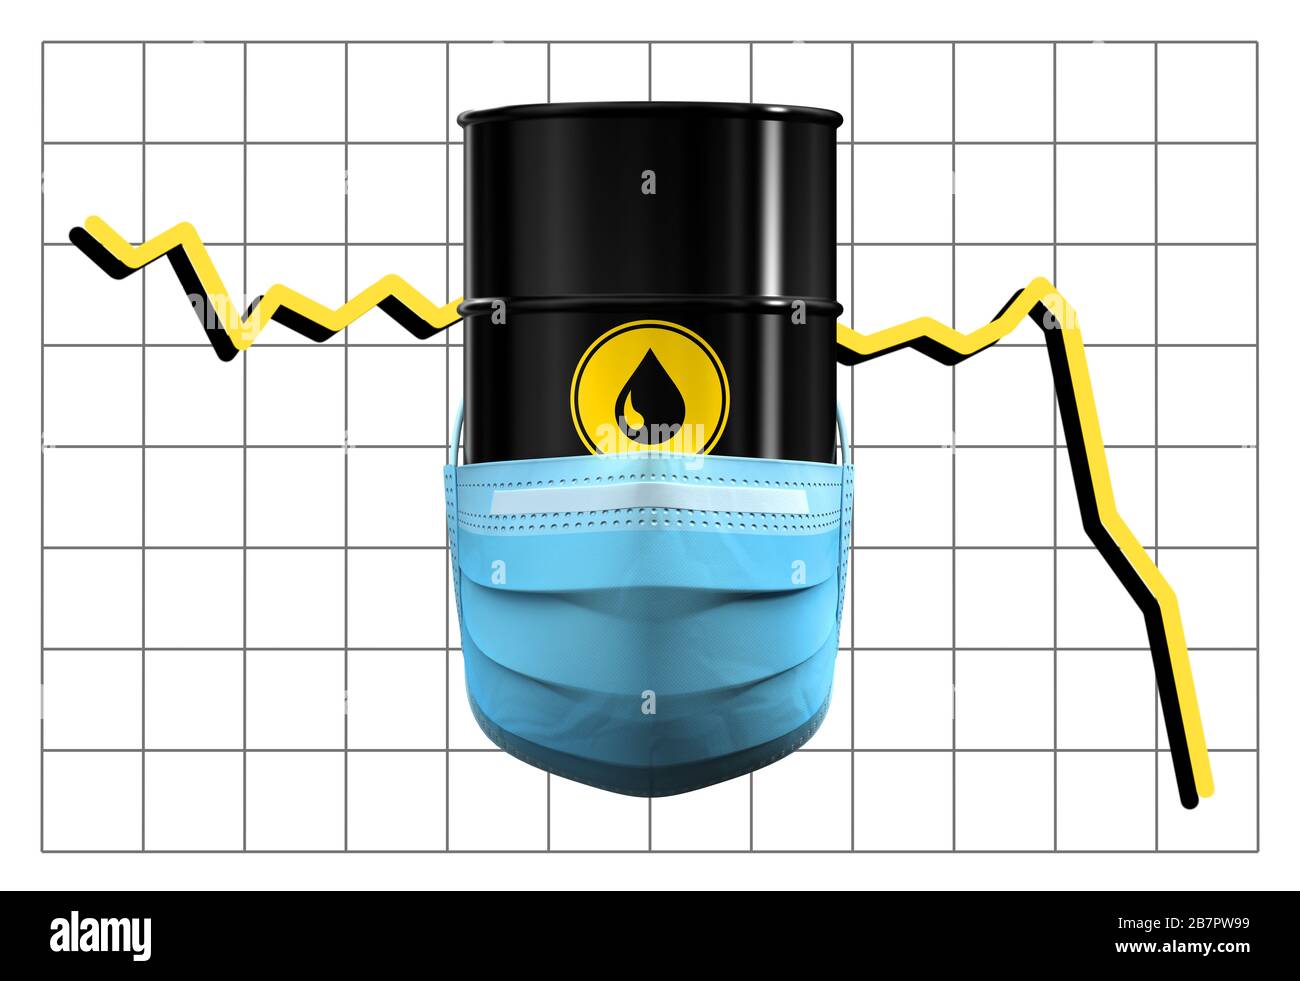 Barrel Of Oil In Medical Mask On Background Of Price Chart Stock Photo